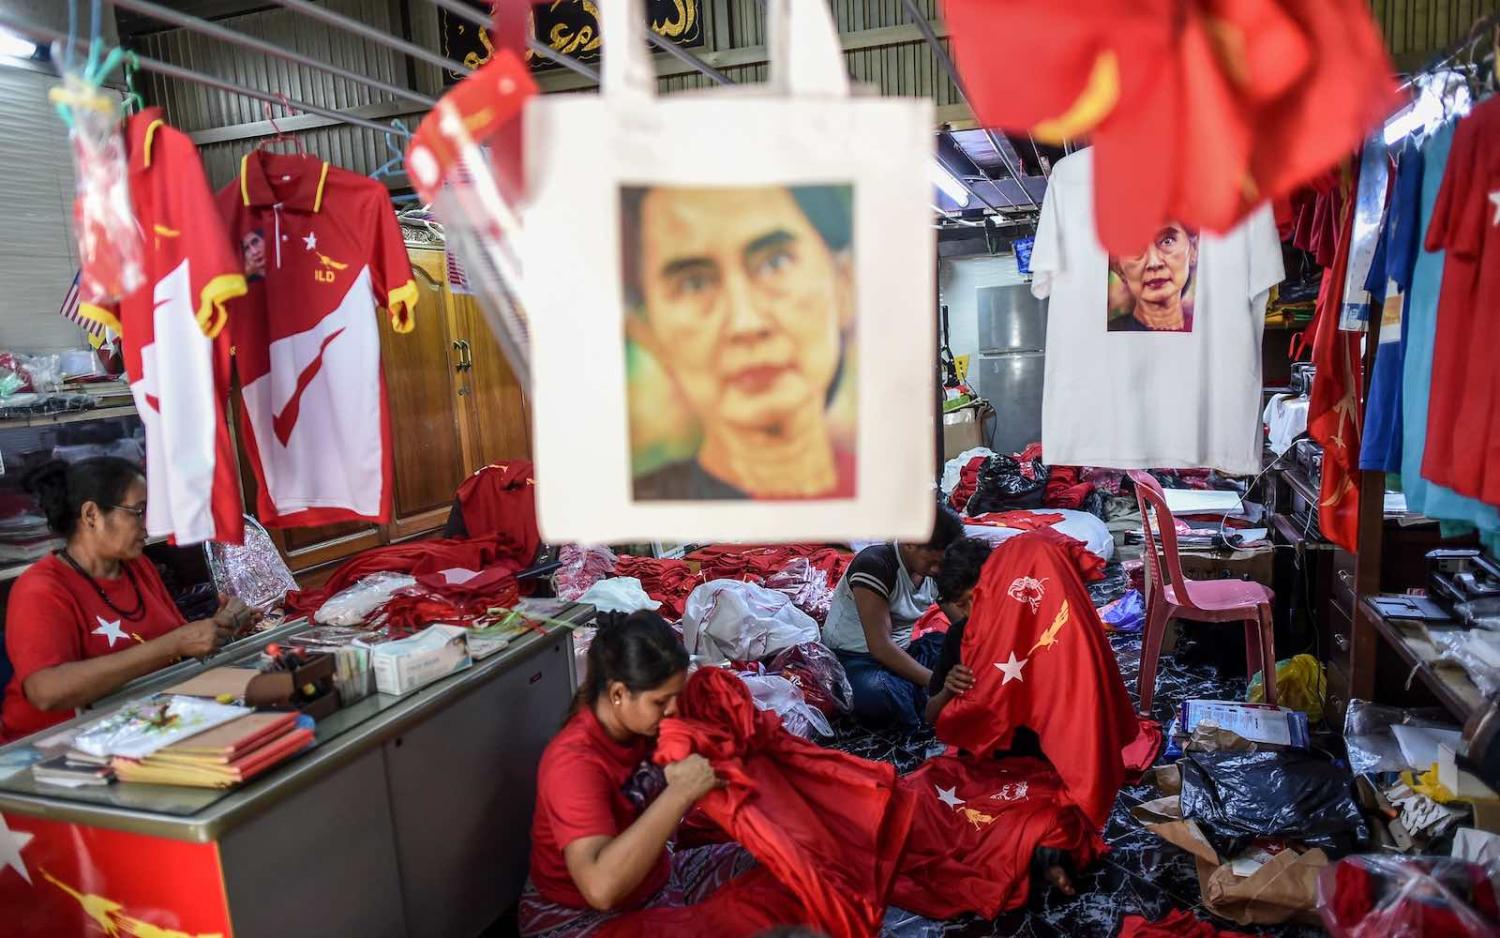 Workers pack T-shirts promoting Aung San Suu Kyi's National League for Democracy party at a print house in Yangon, 2 September 2020 (Ye Aung Thu/AFP via Getty Images)